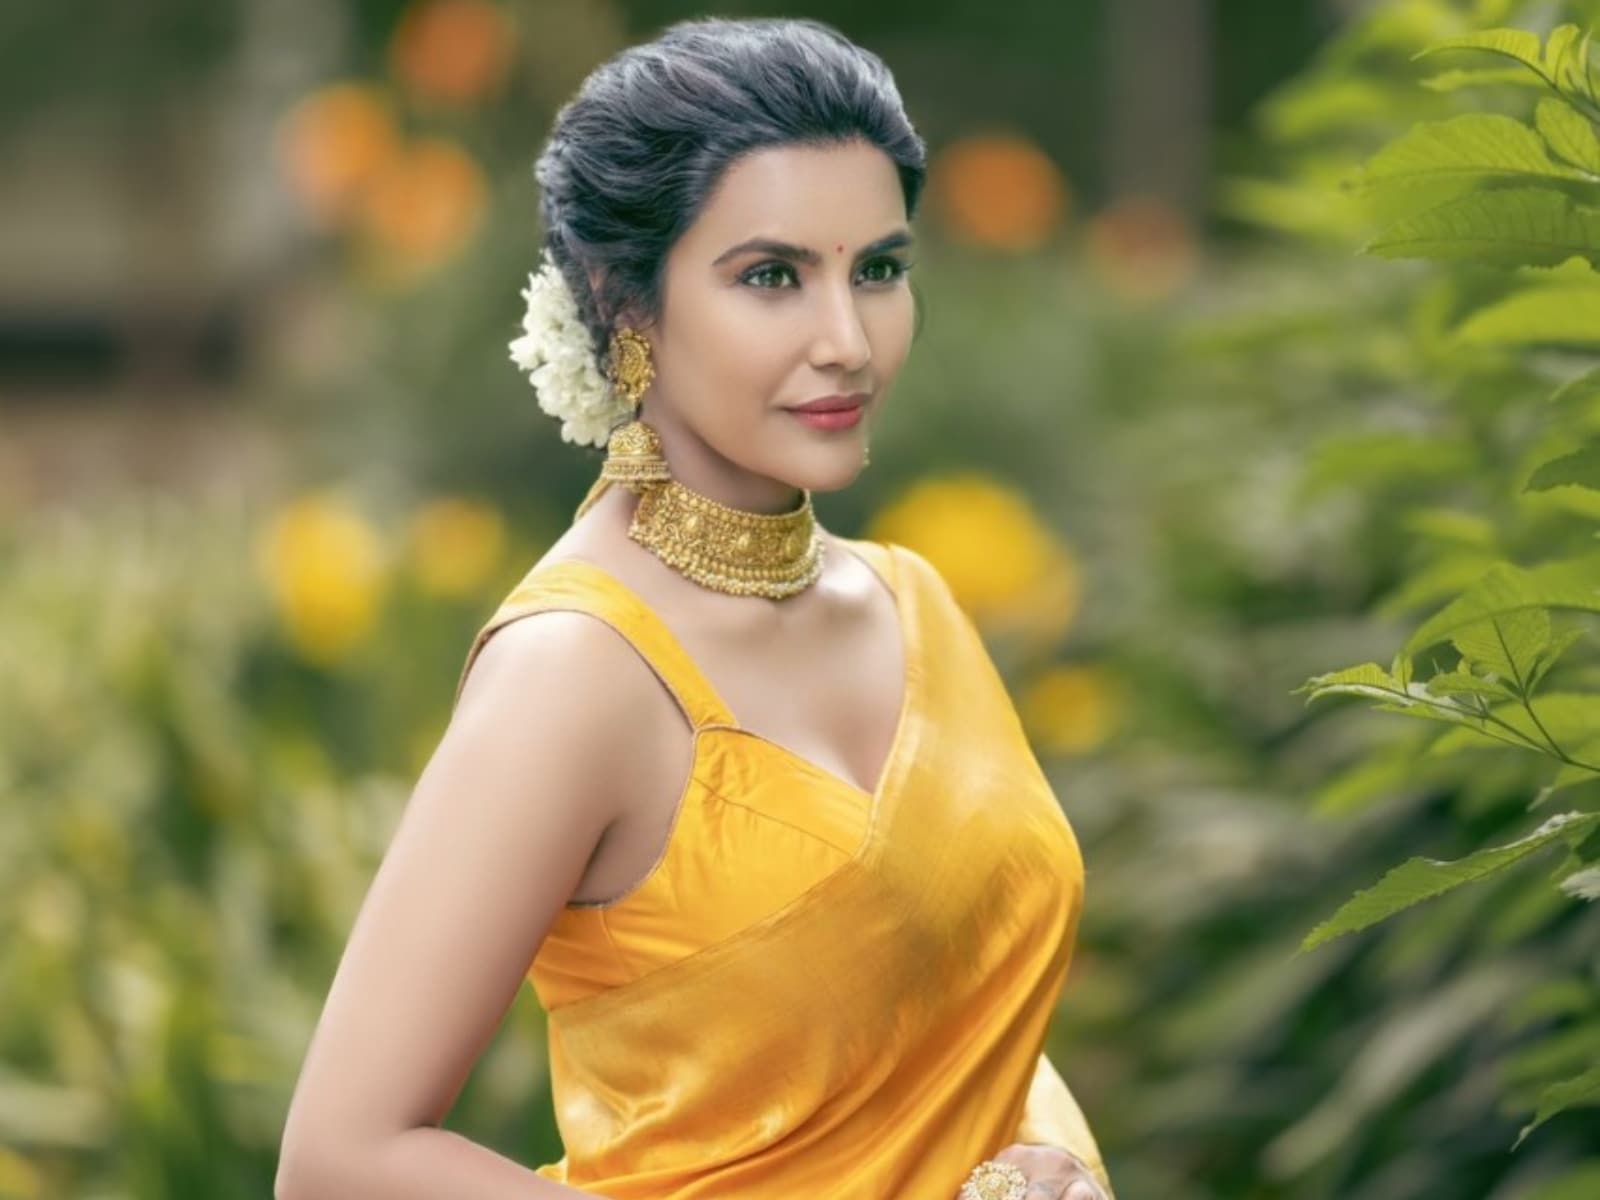 In Yellow Saree, Tamil Actress Priya Anand Looks Drop-Dead Gorgeous; Fans  React - News18